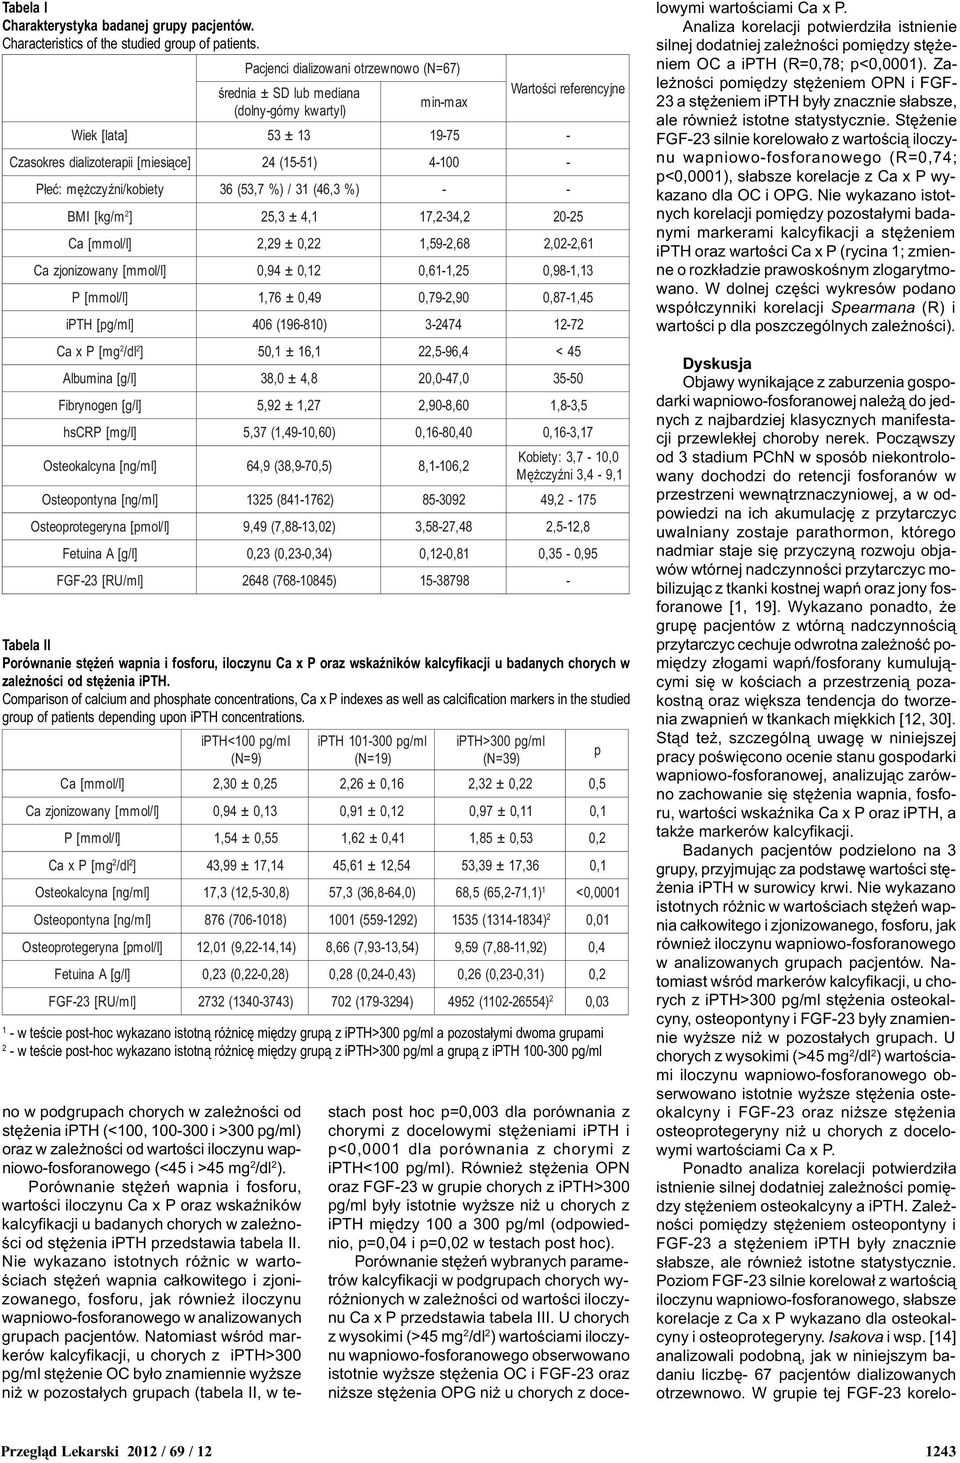 Comparison of calcium and phosphate concentrations, x P indexes as well as calcification markers in the studied group of patients depending upon ipth concentrations.